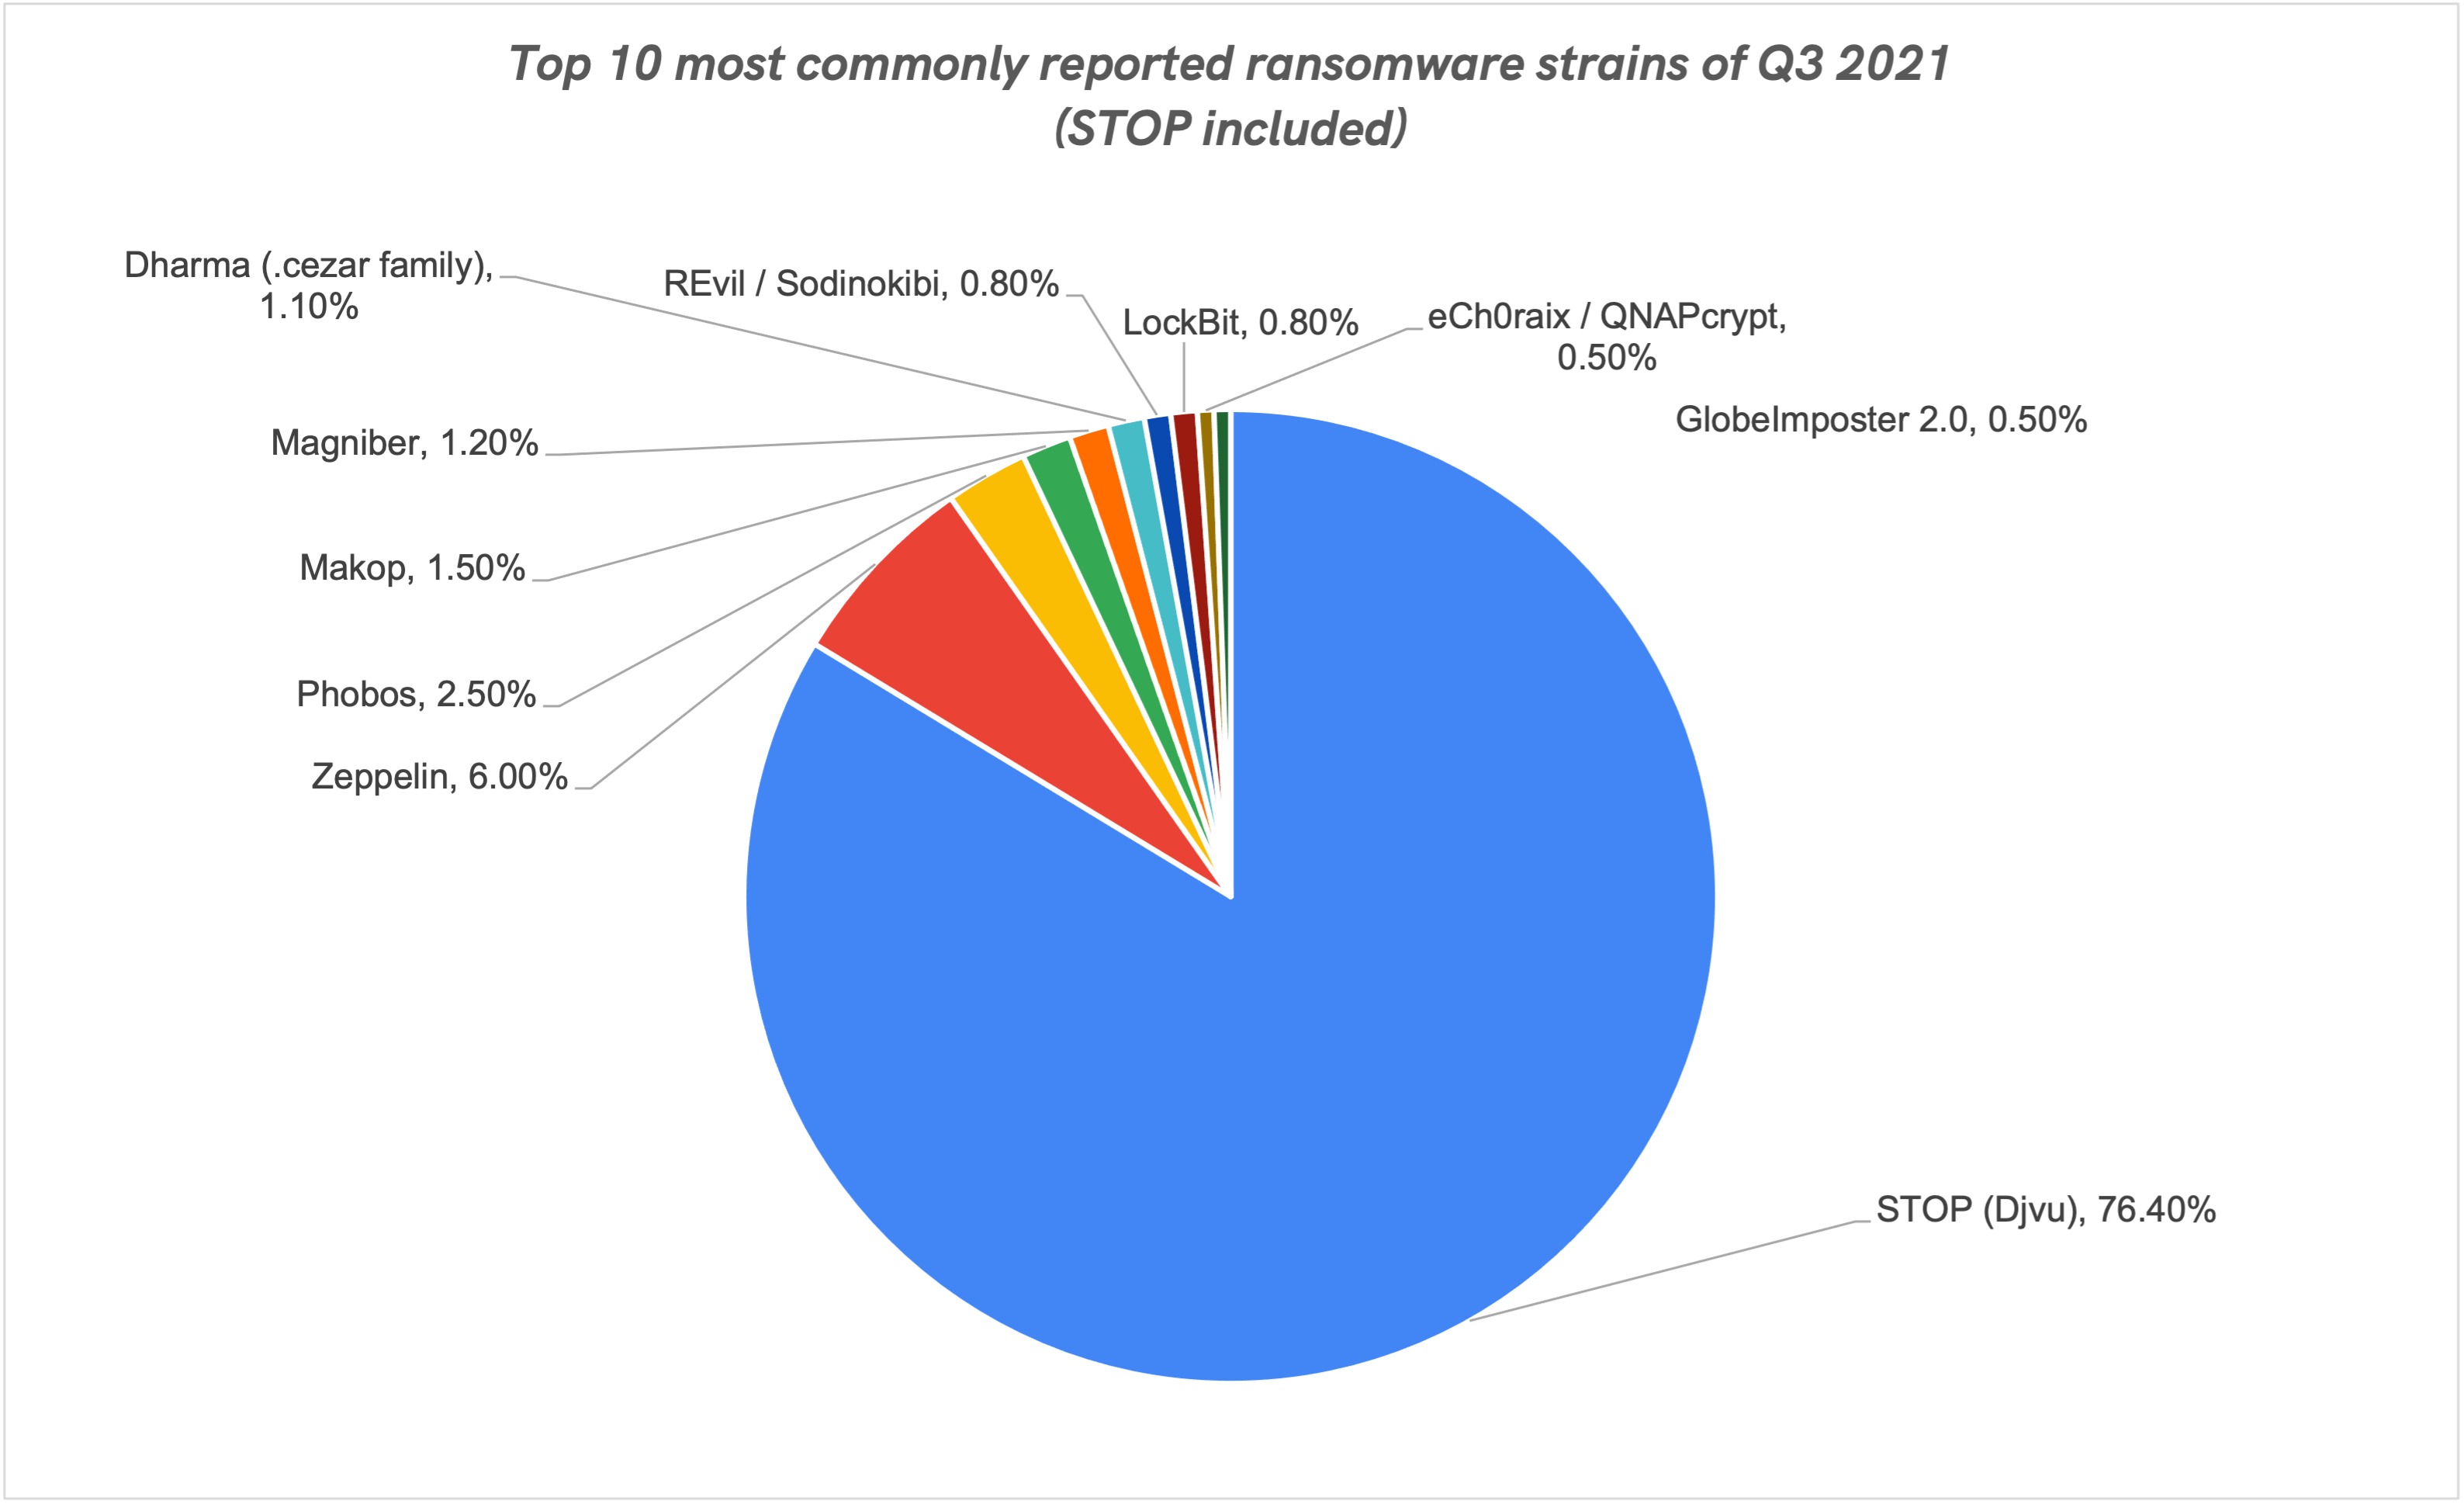 Top 10 most commonly reported ransomware strains of Q3 2021(STOP included)